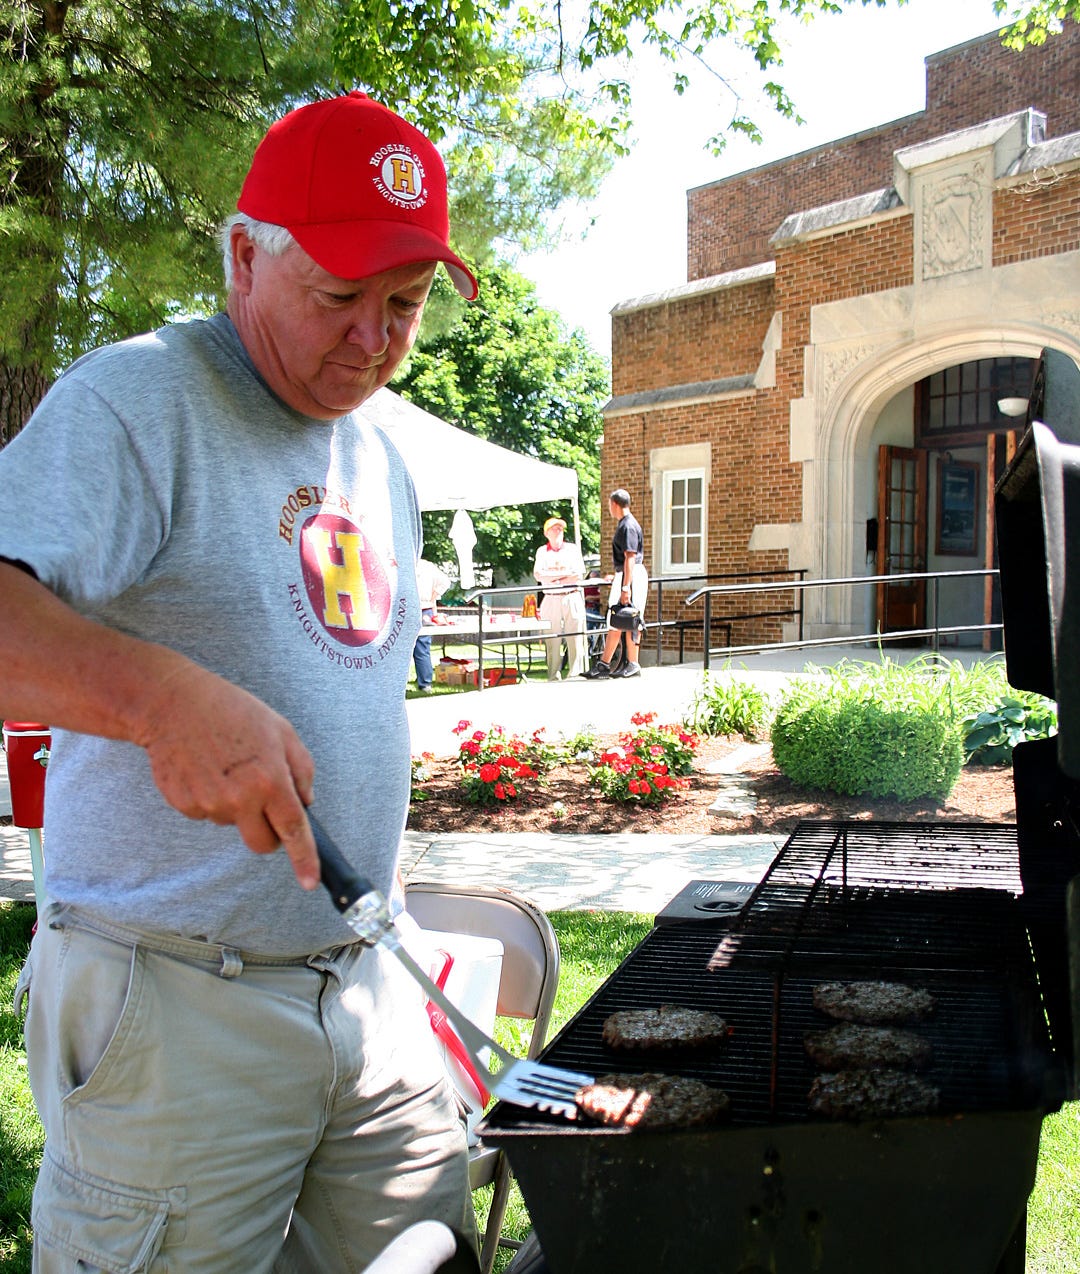 Grilling hamburgers for the concession stand in 2009, longtime Hoosier Gym volunteer Larry Loveall is no stranger to gym events. Concession stand sales bolster the gym’s limited finances. That means Loveall and other gym volunteers regularly busy themselves preparing and selling hot dogs, popcorn and other items to hungry visitors.